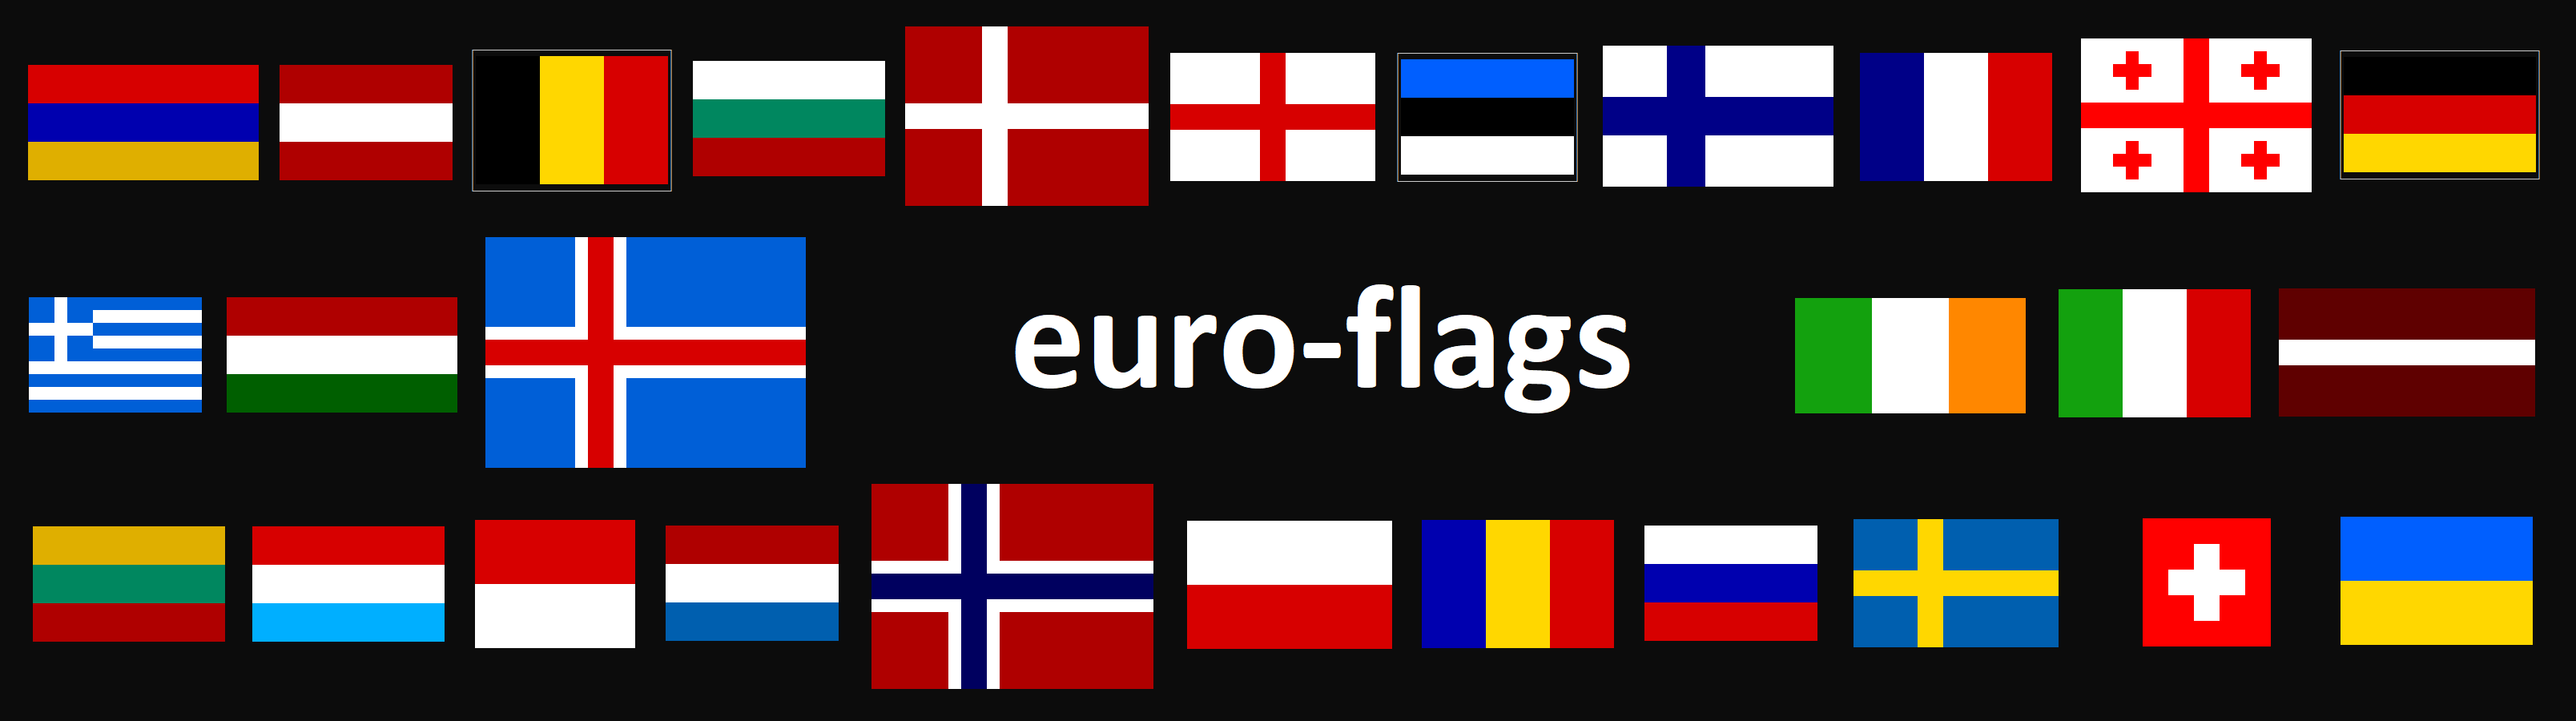 What euro-flags prints to the console